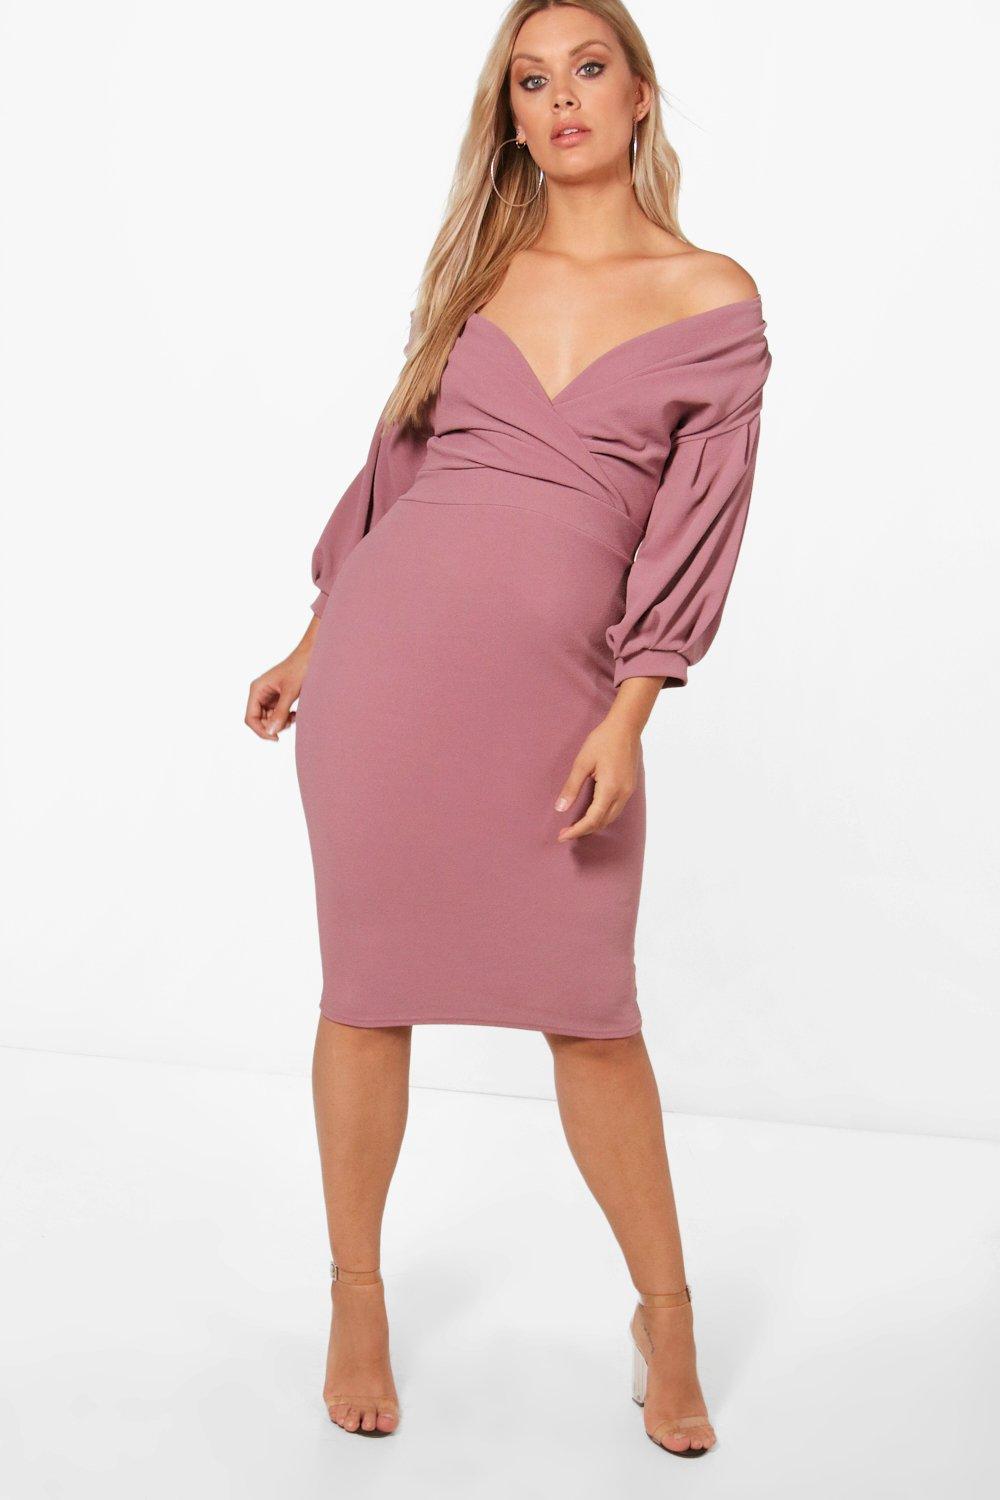 boohoo plus size summer clothes